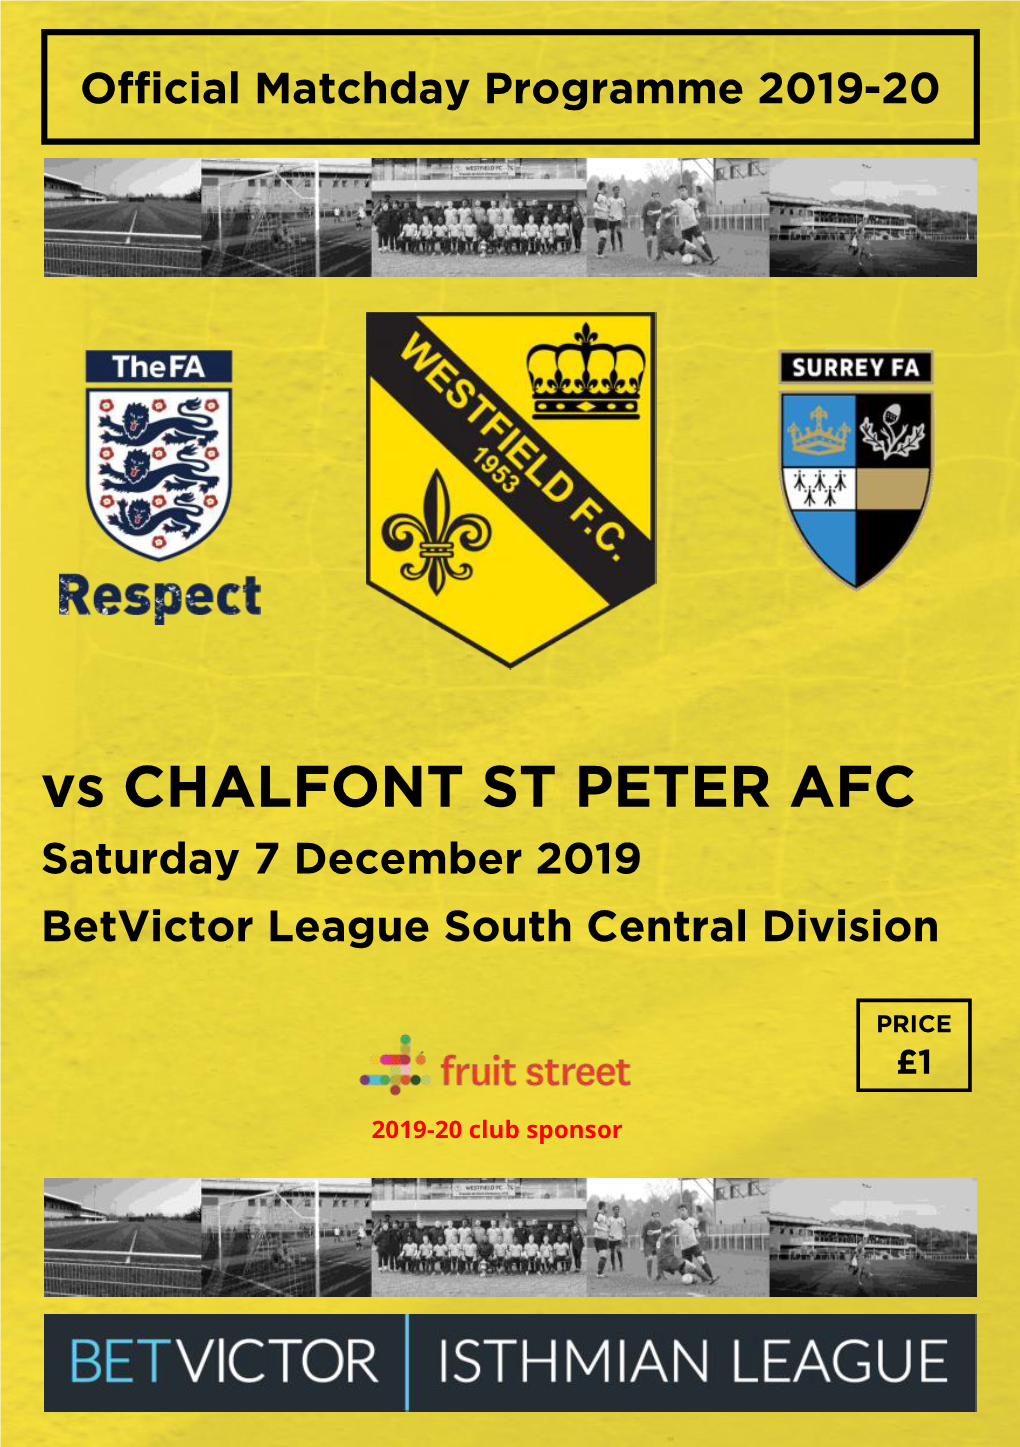 Vs CHALFONT ST PETER AFC Saturday 7 December 2019 Betvictor League South Central Division